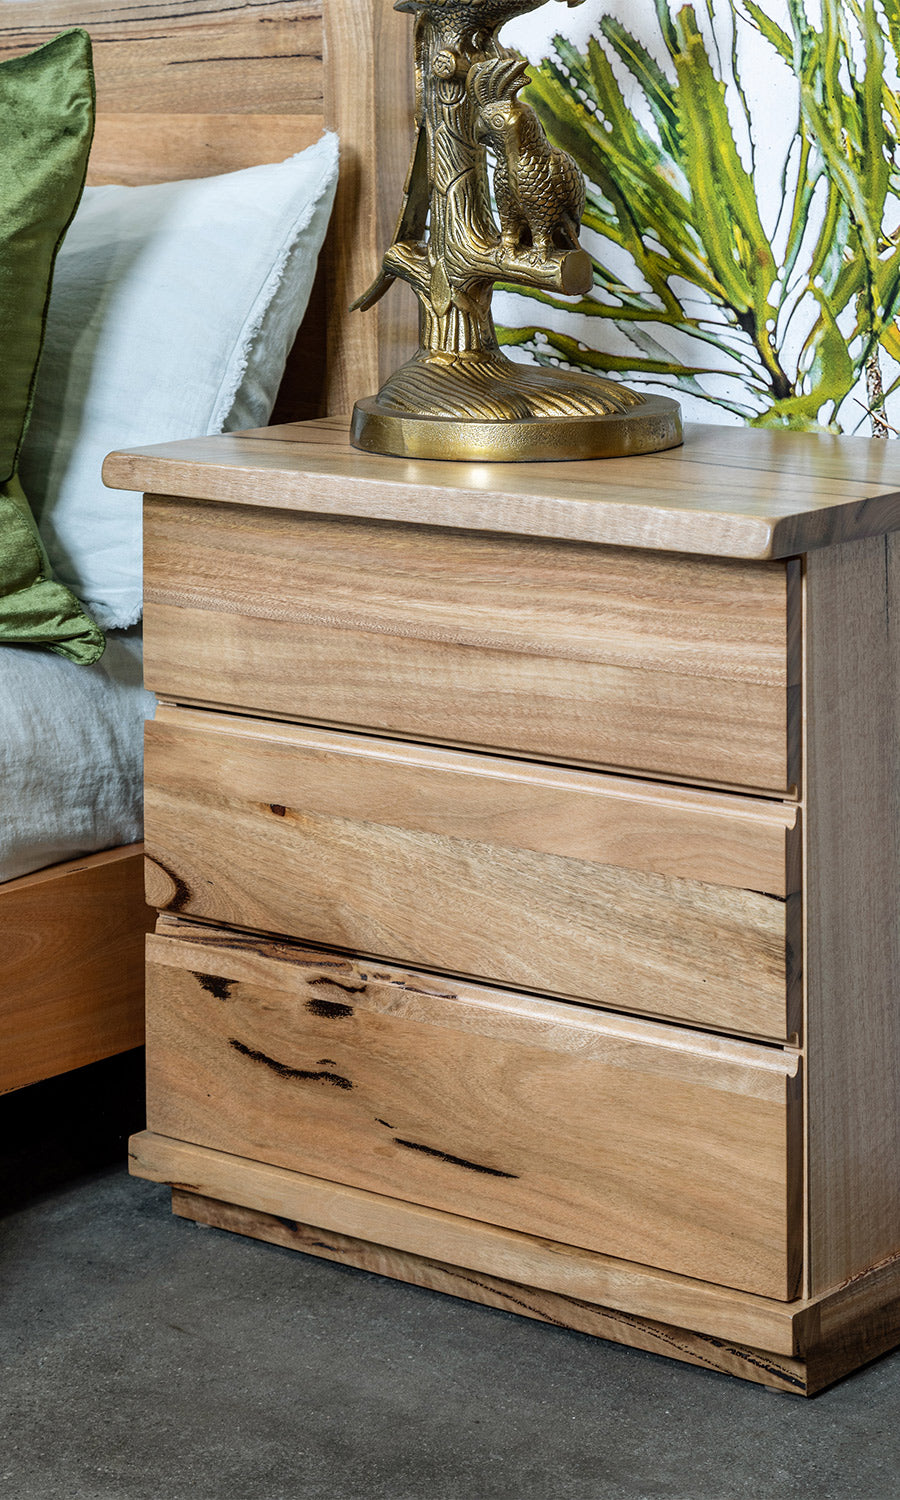 Naturaliste Natural Edge Marri Timber Wood Bedside Tables with drawers - Perth WA